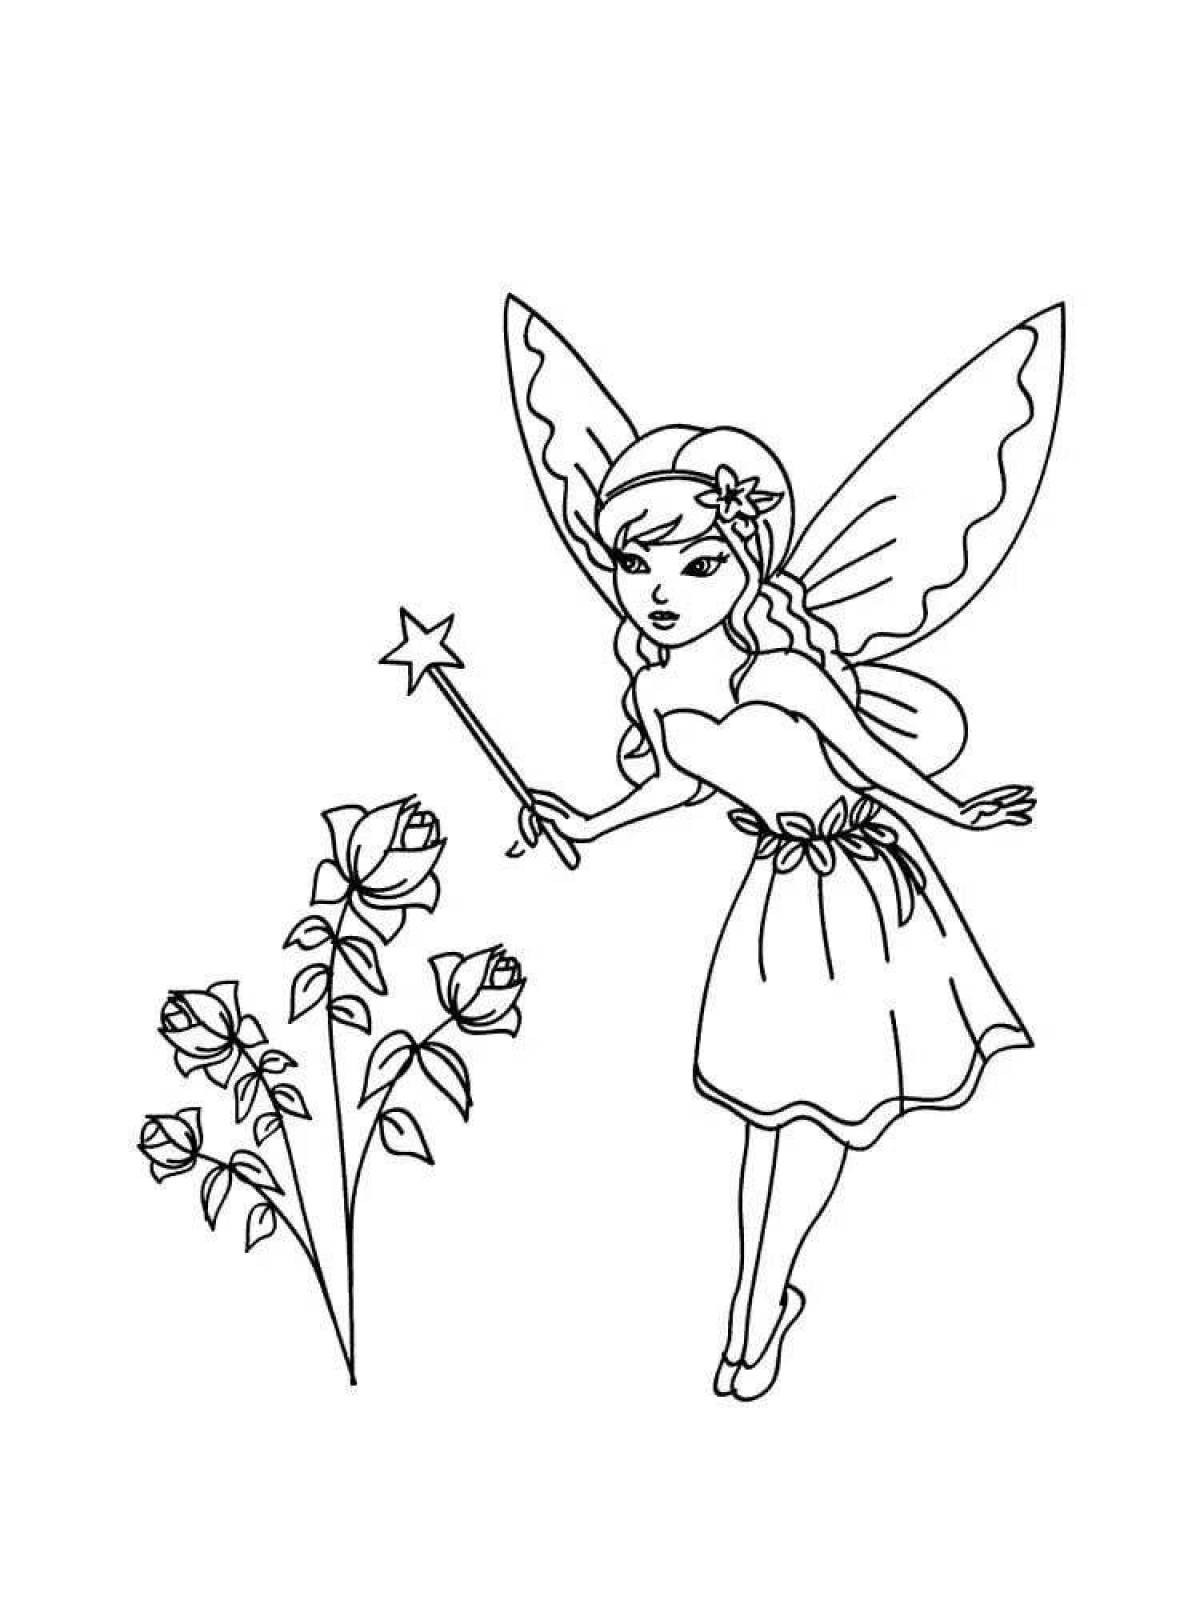 Coloring page playful little fairy